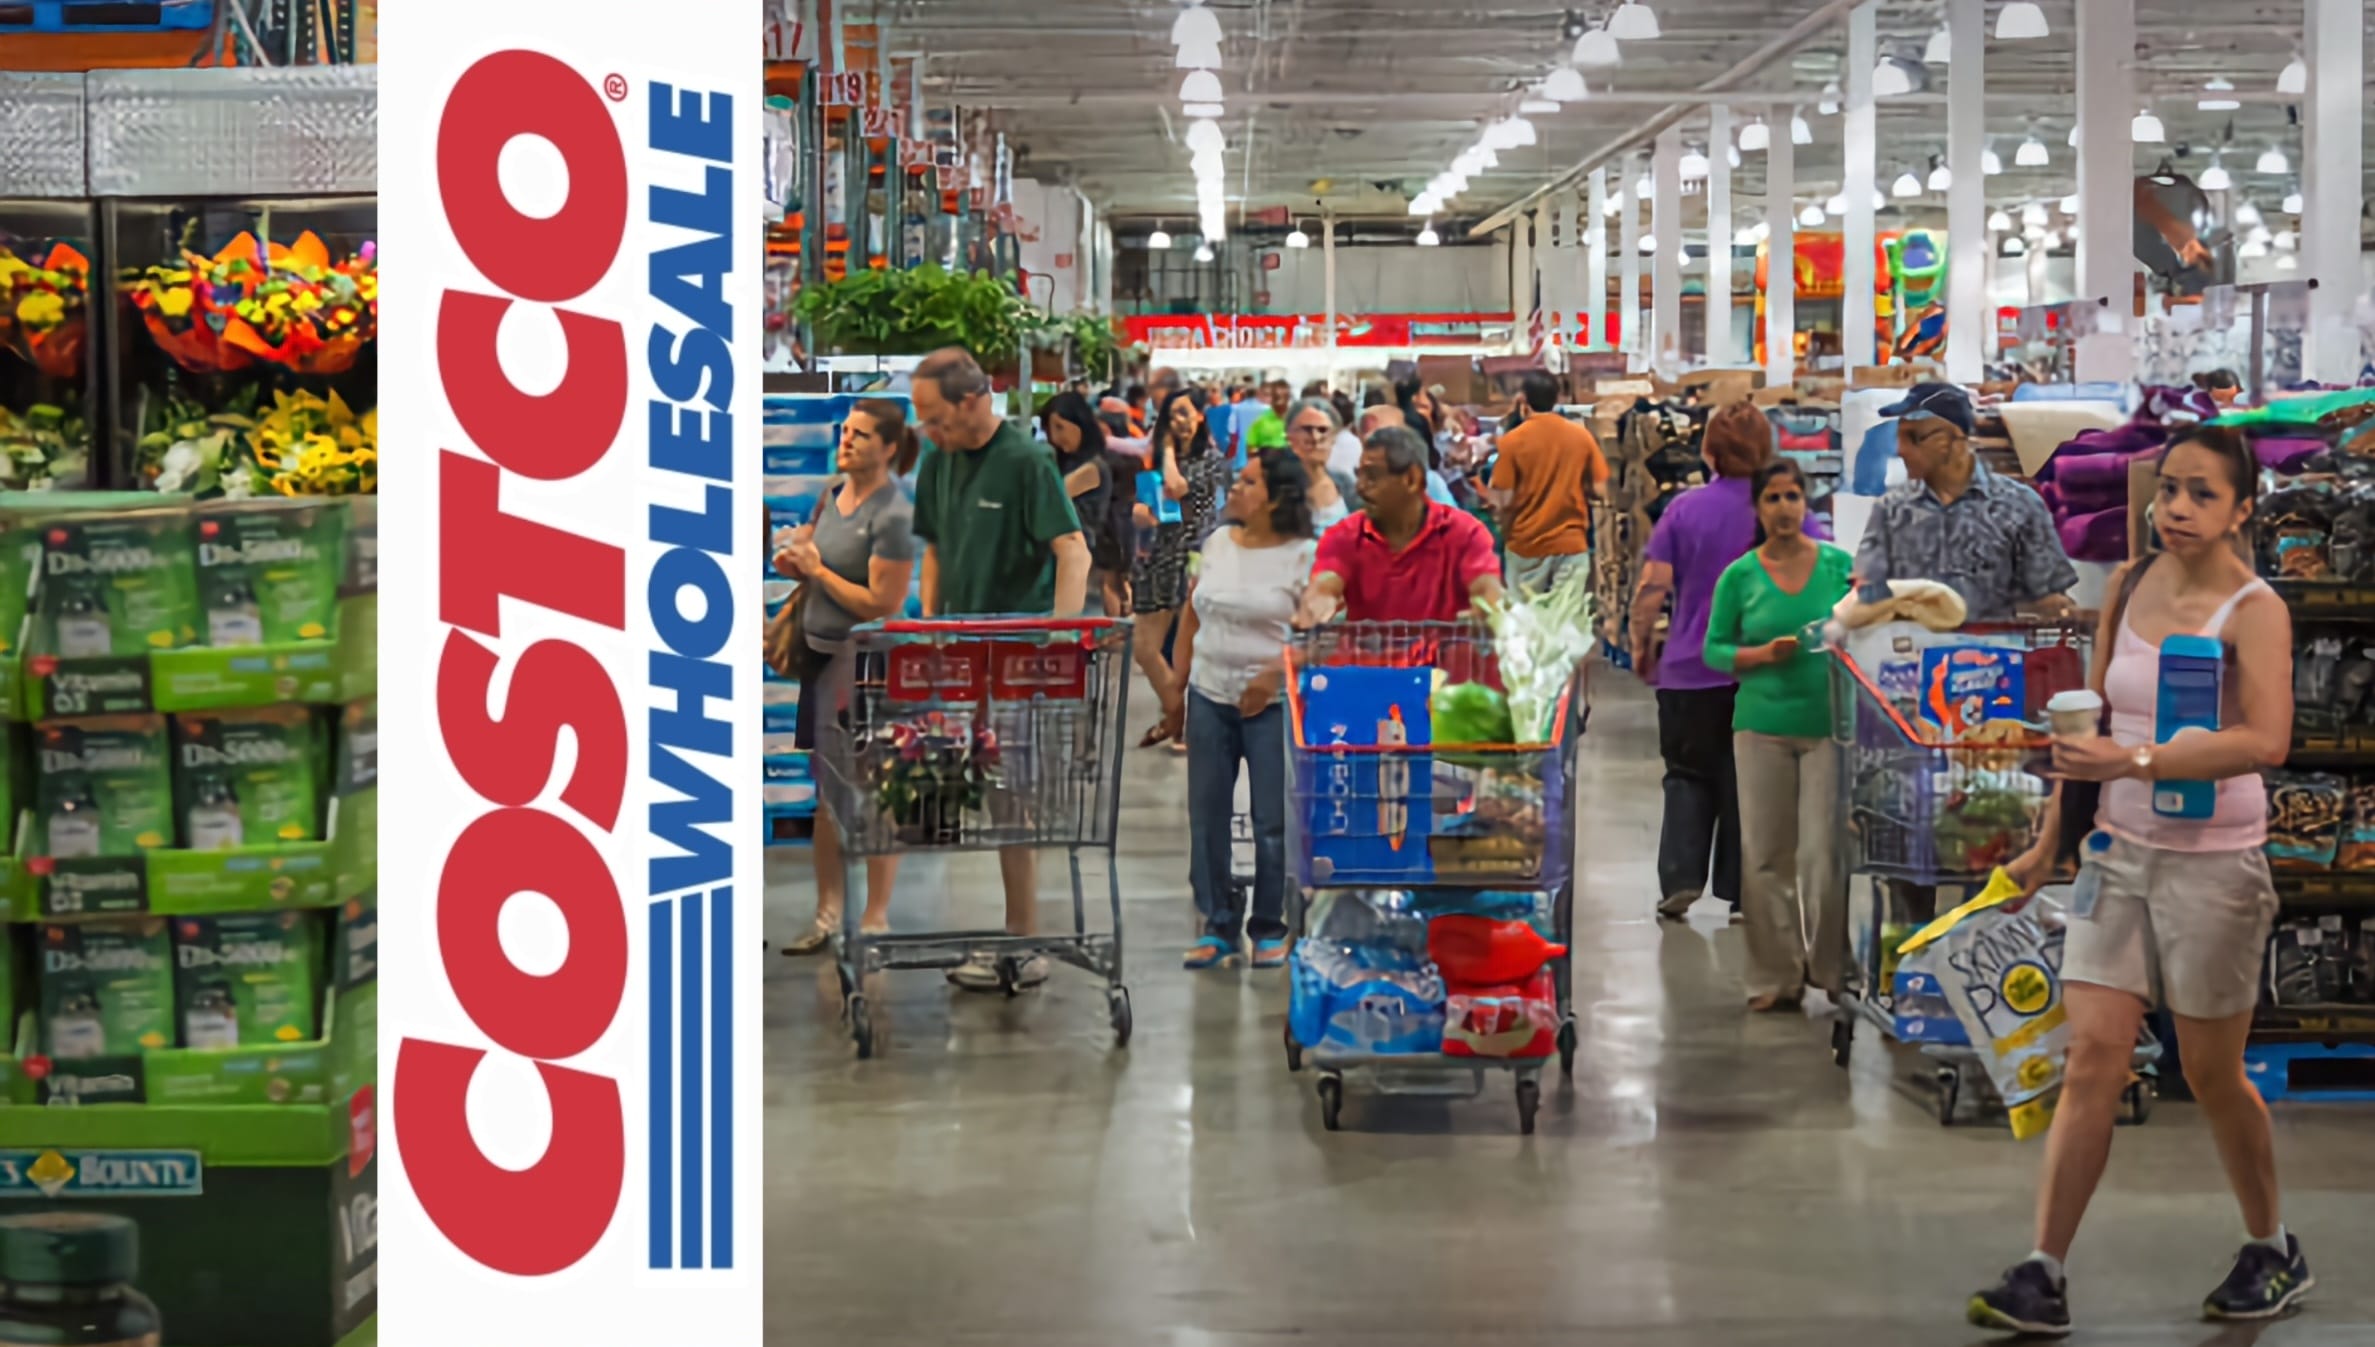 As of this date, Costco will no longer sell food to non-members